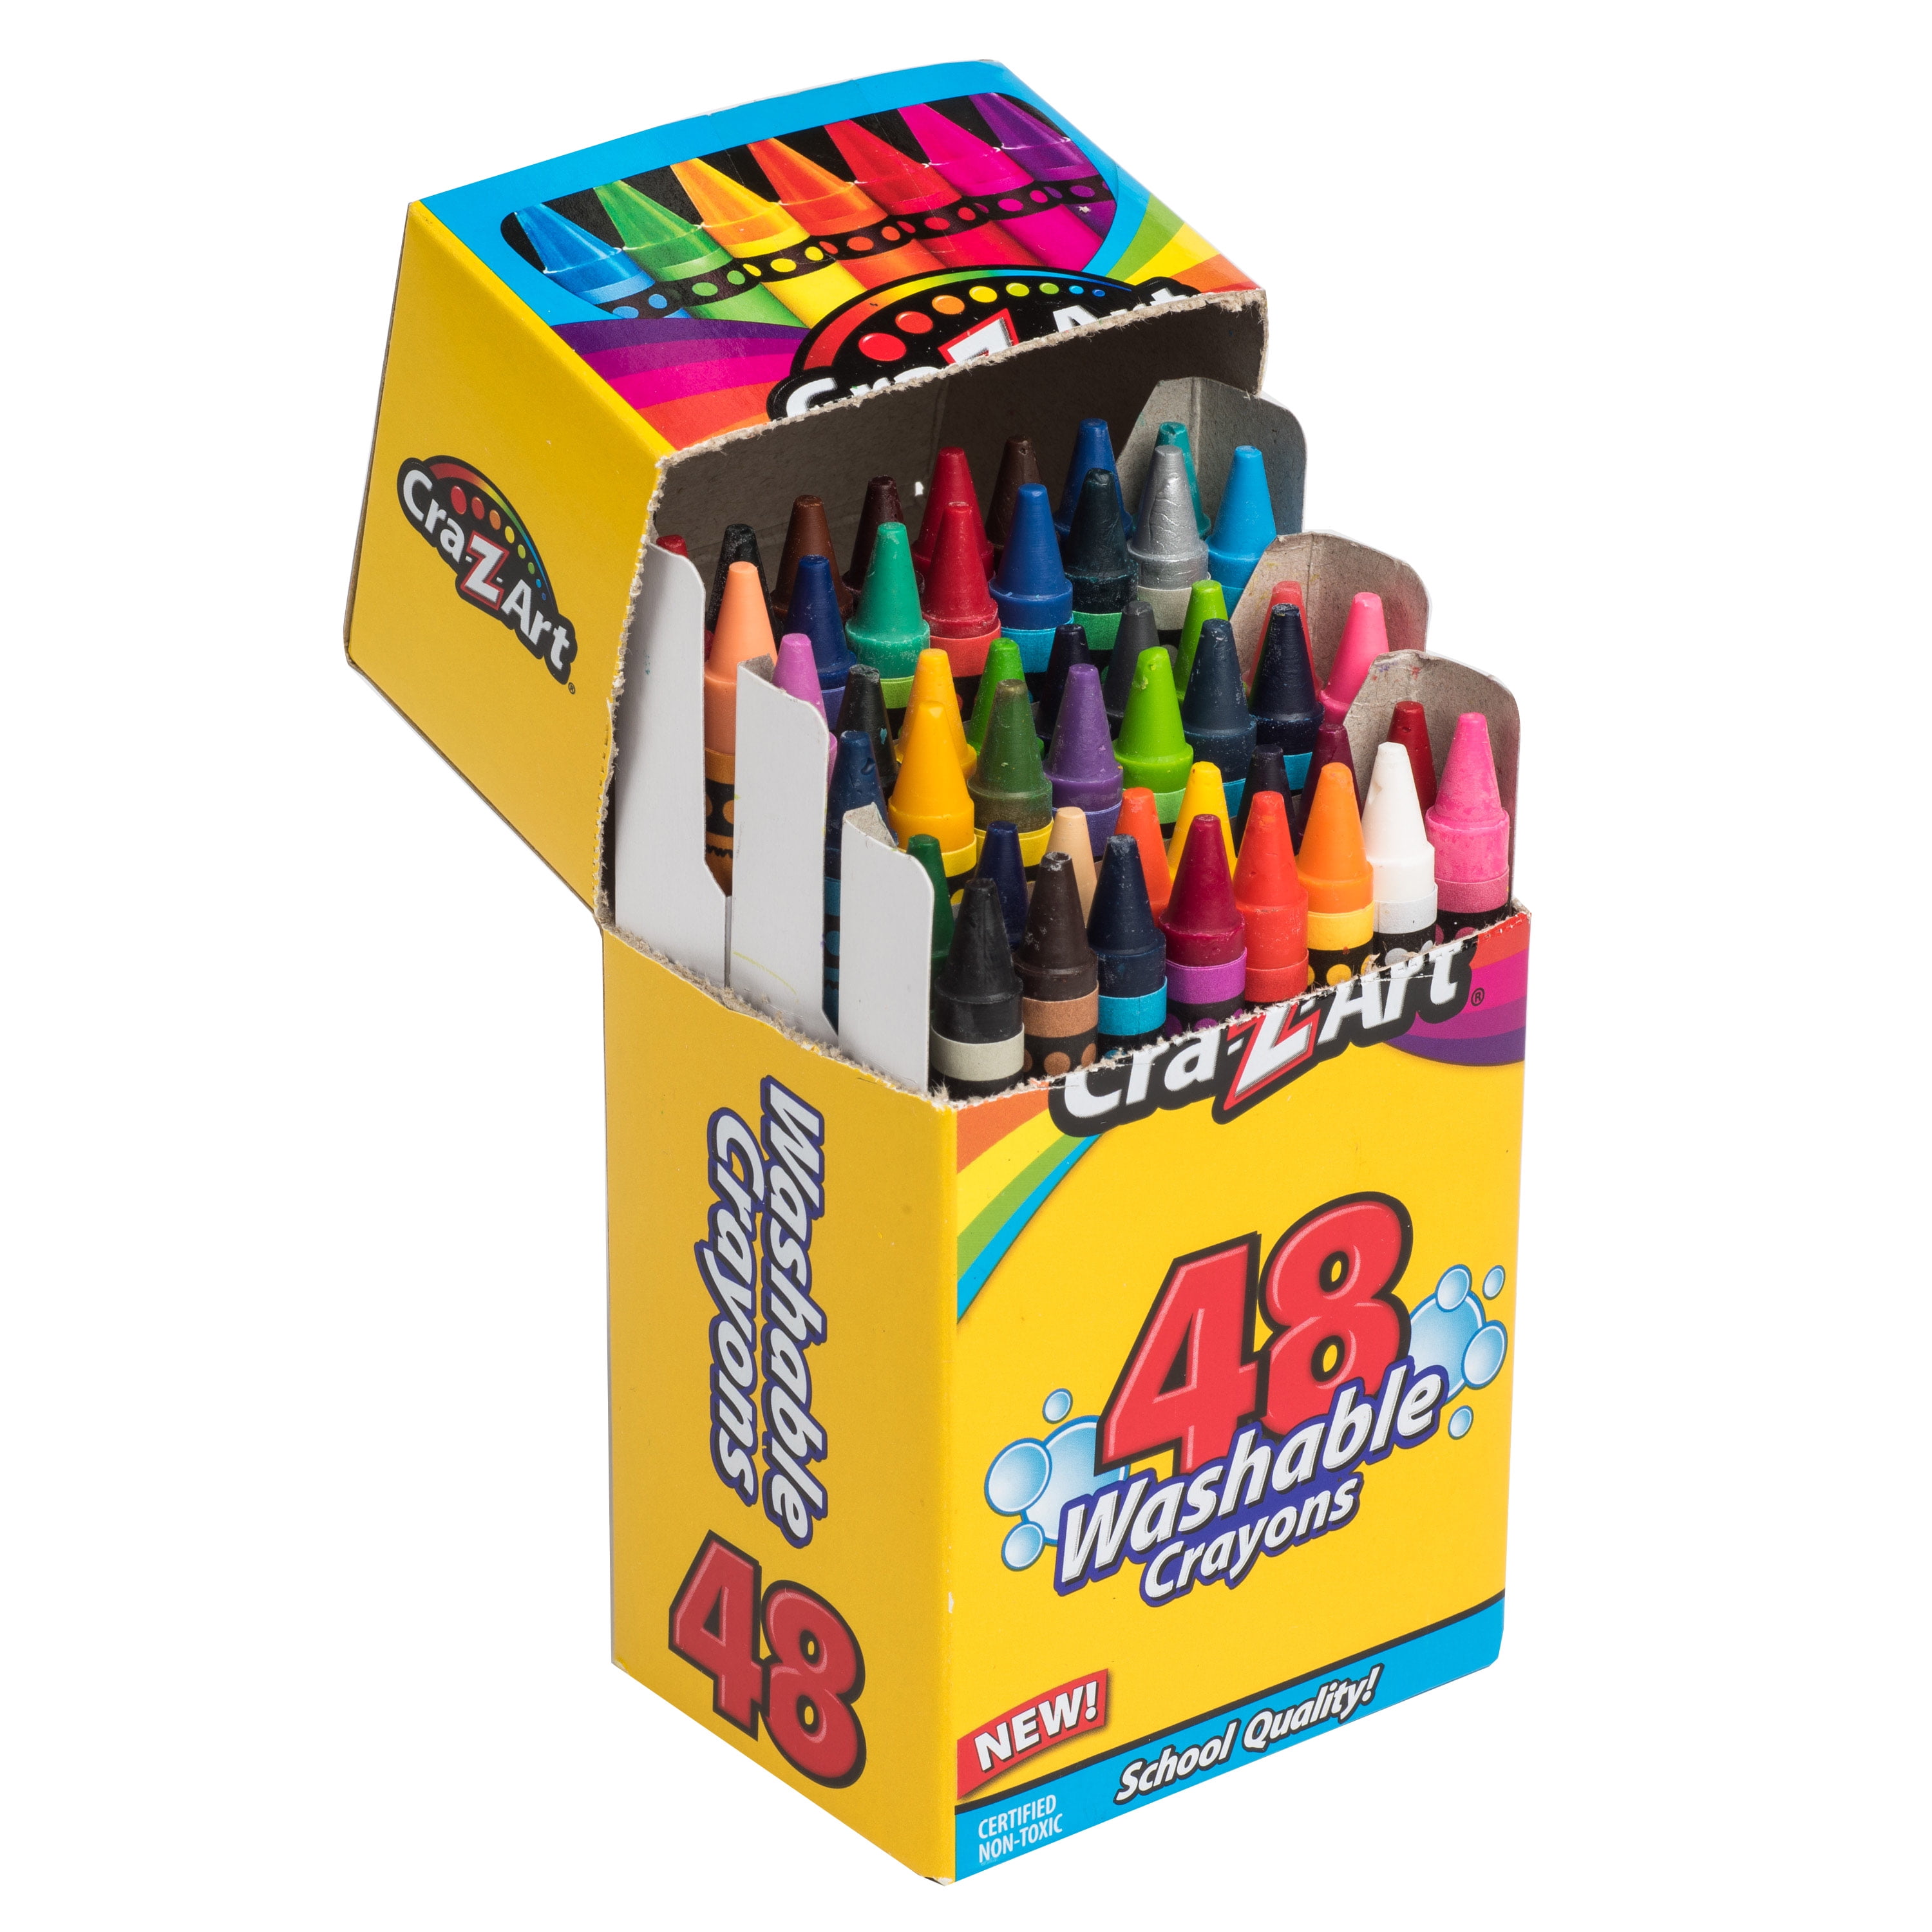 Cra-Z-Art 48 Count Multicolor Washable Crayon, Children to Adult